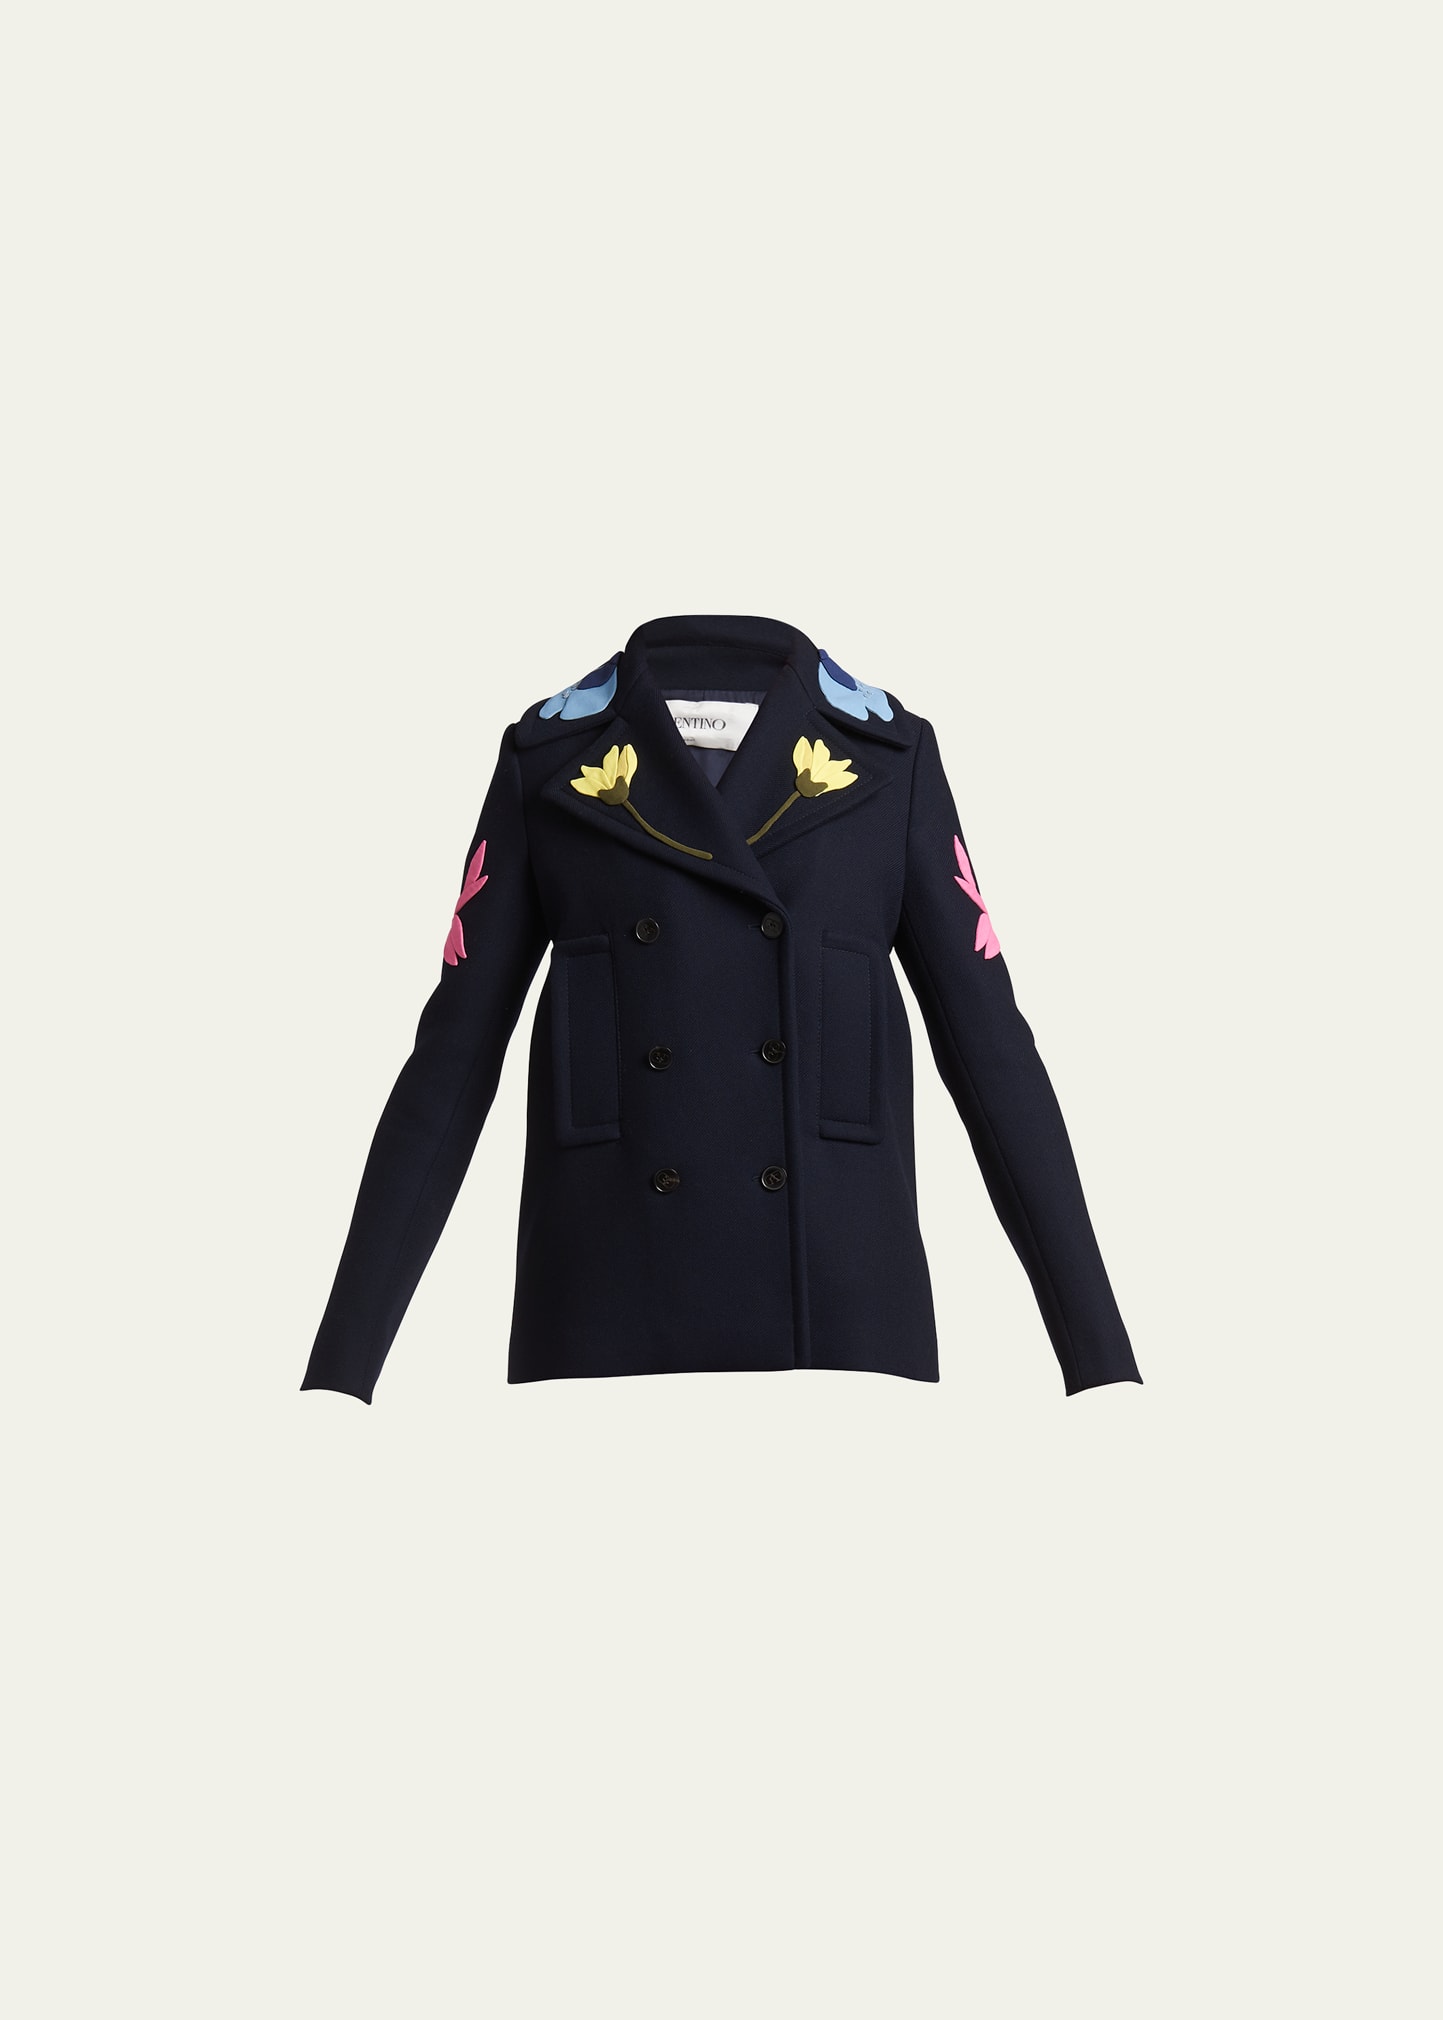 Floral Applique Double-Breasted Pea Coat